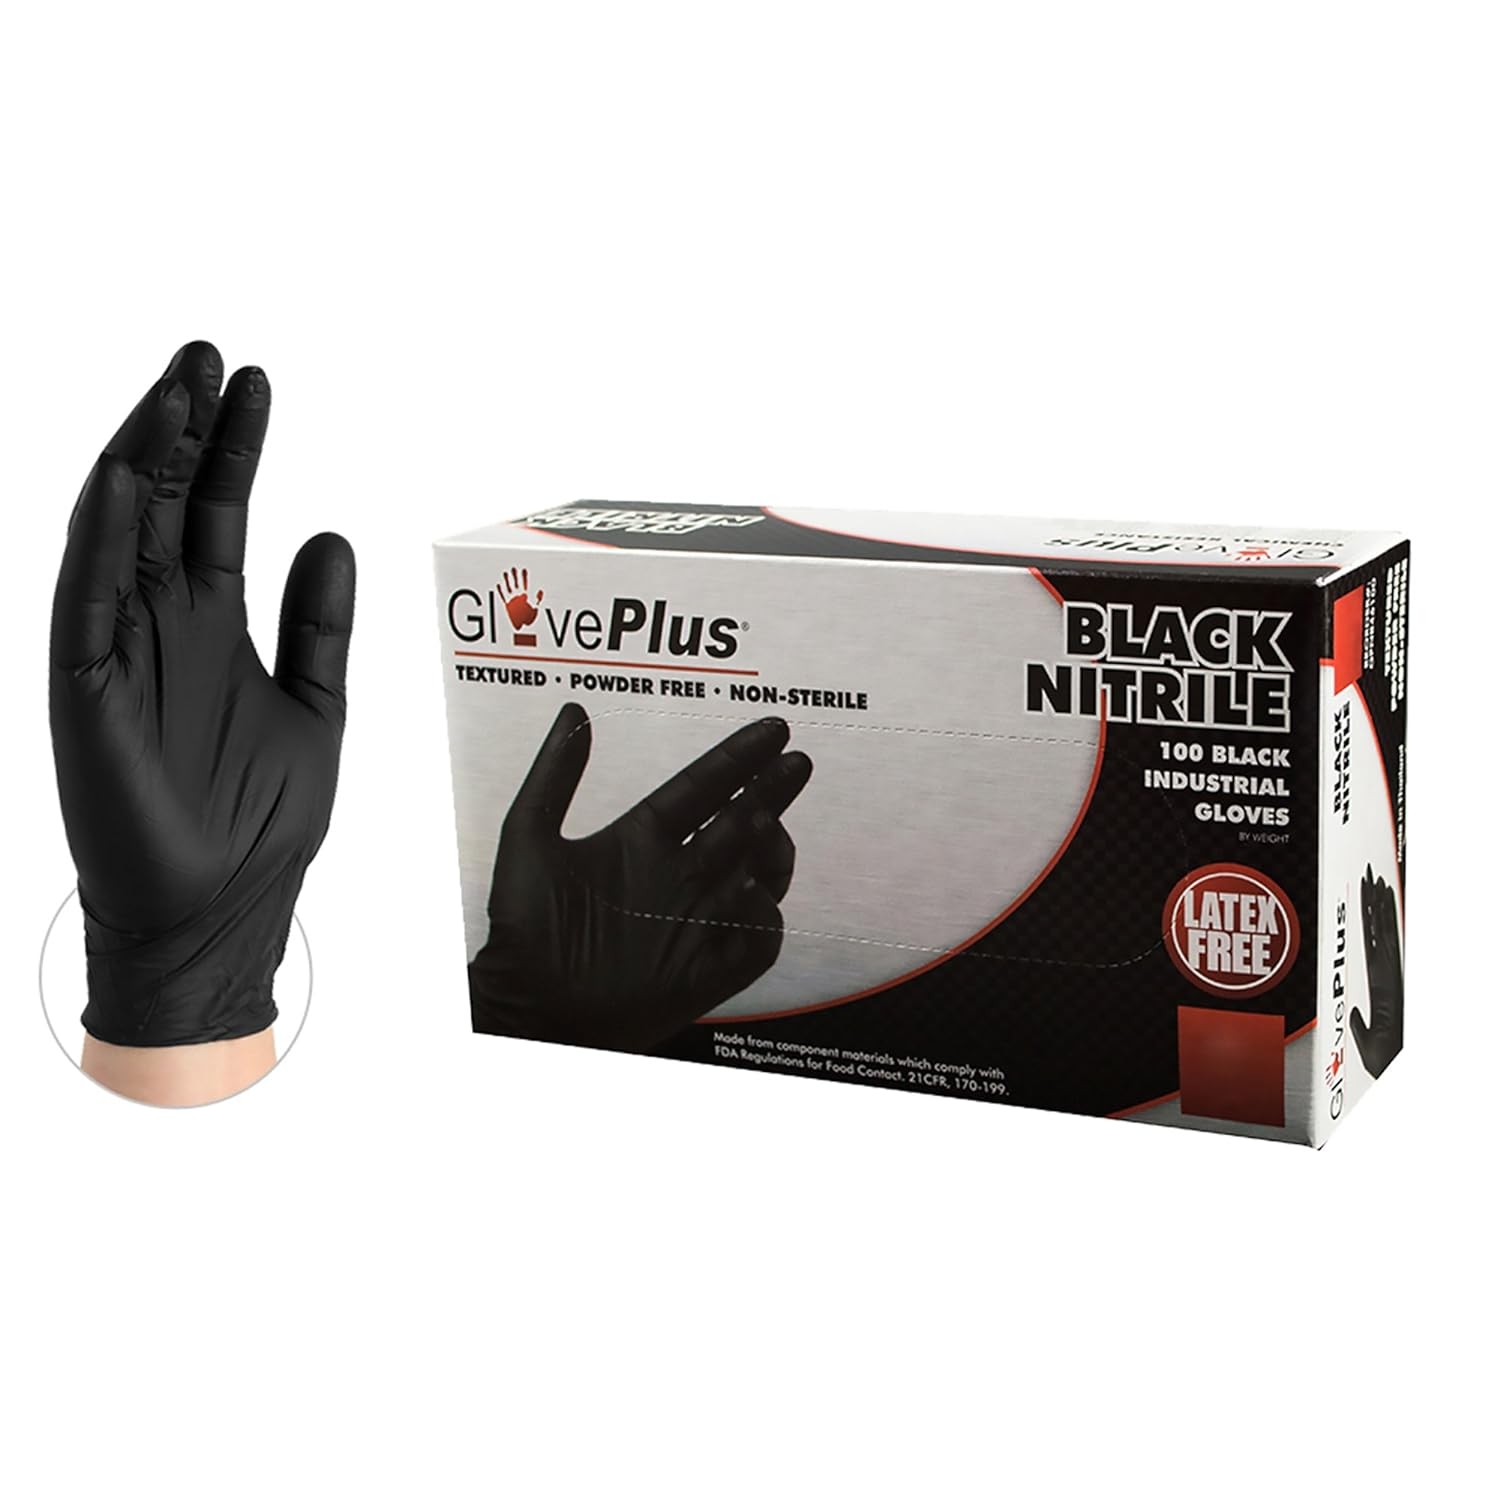 AMMEX GlovePlus Black Nitrile Industrial Gloves, Pallet of 70 Cases/70,000 Gloves, 5 mil, Size Medium, Latex Free, Powder Free, Textured, Disposable, GPNB44100P70